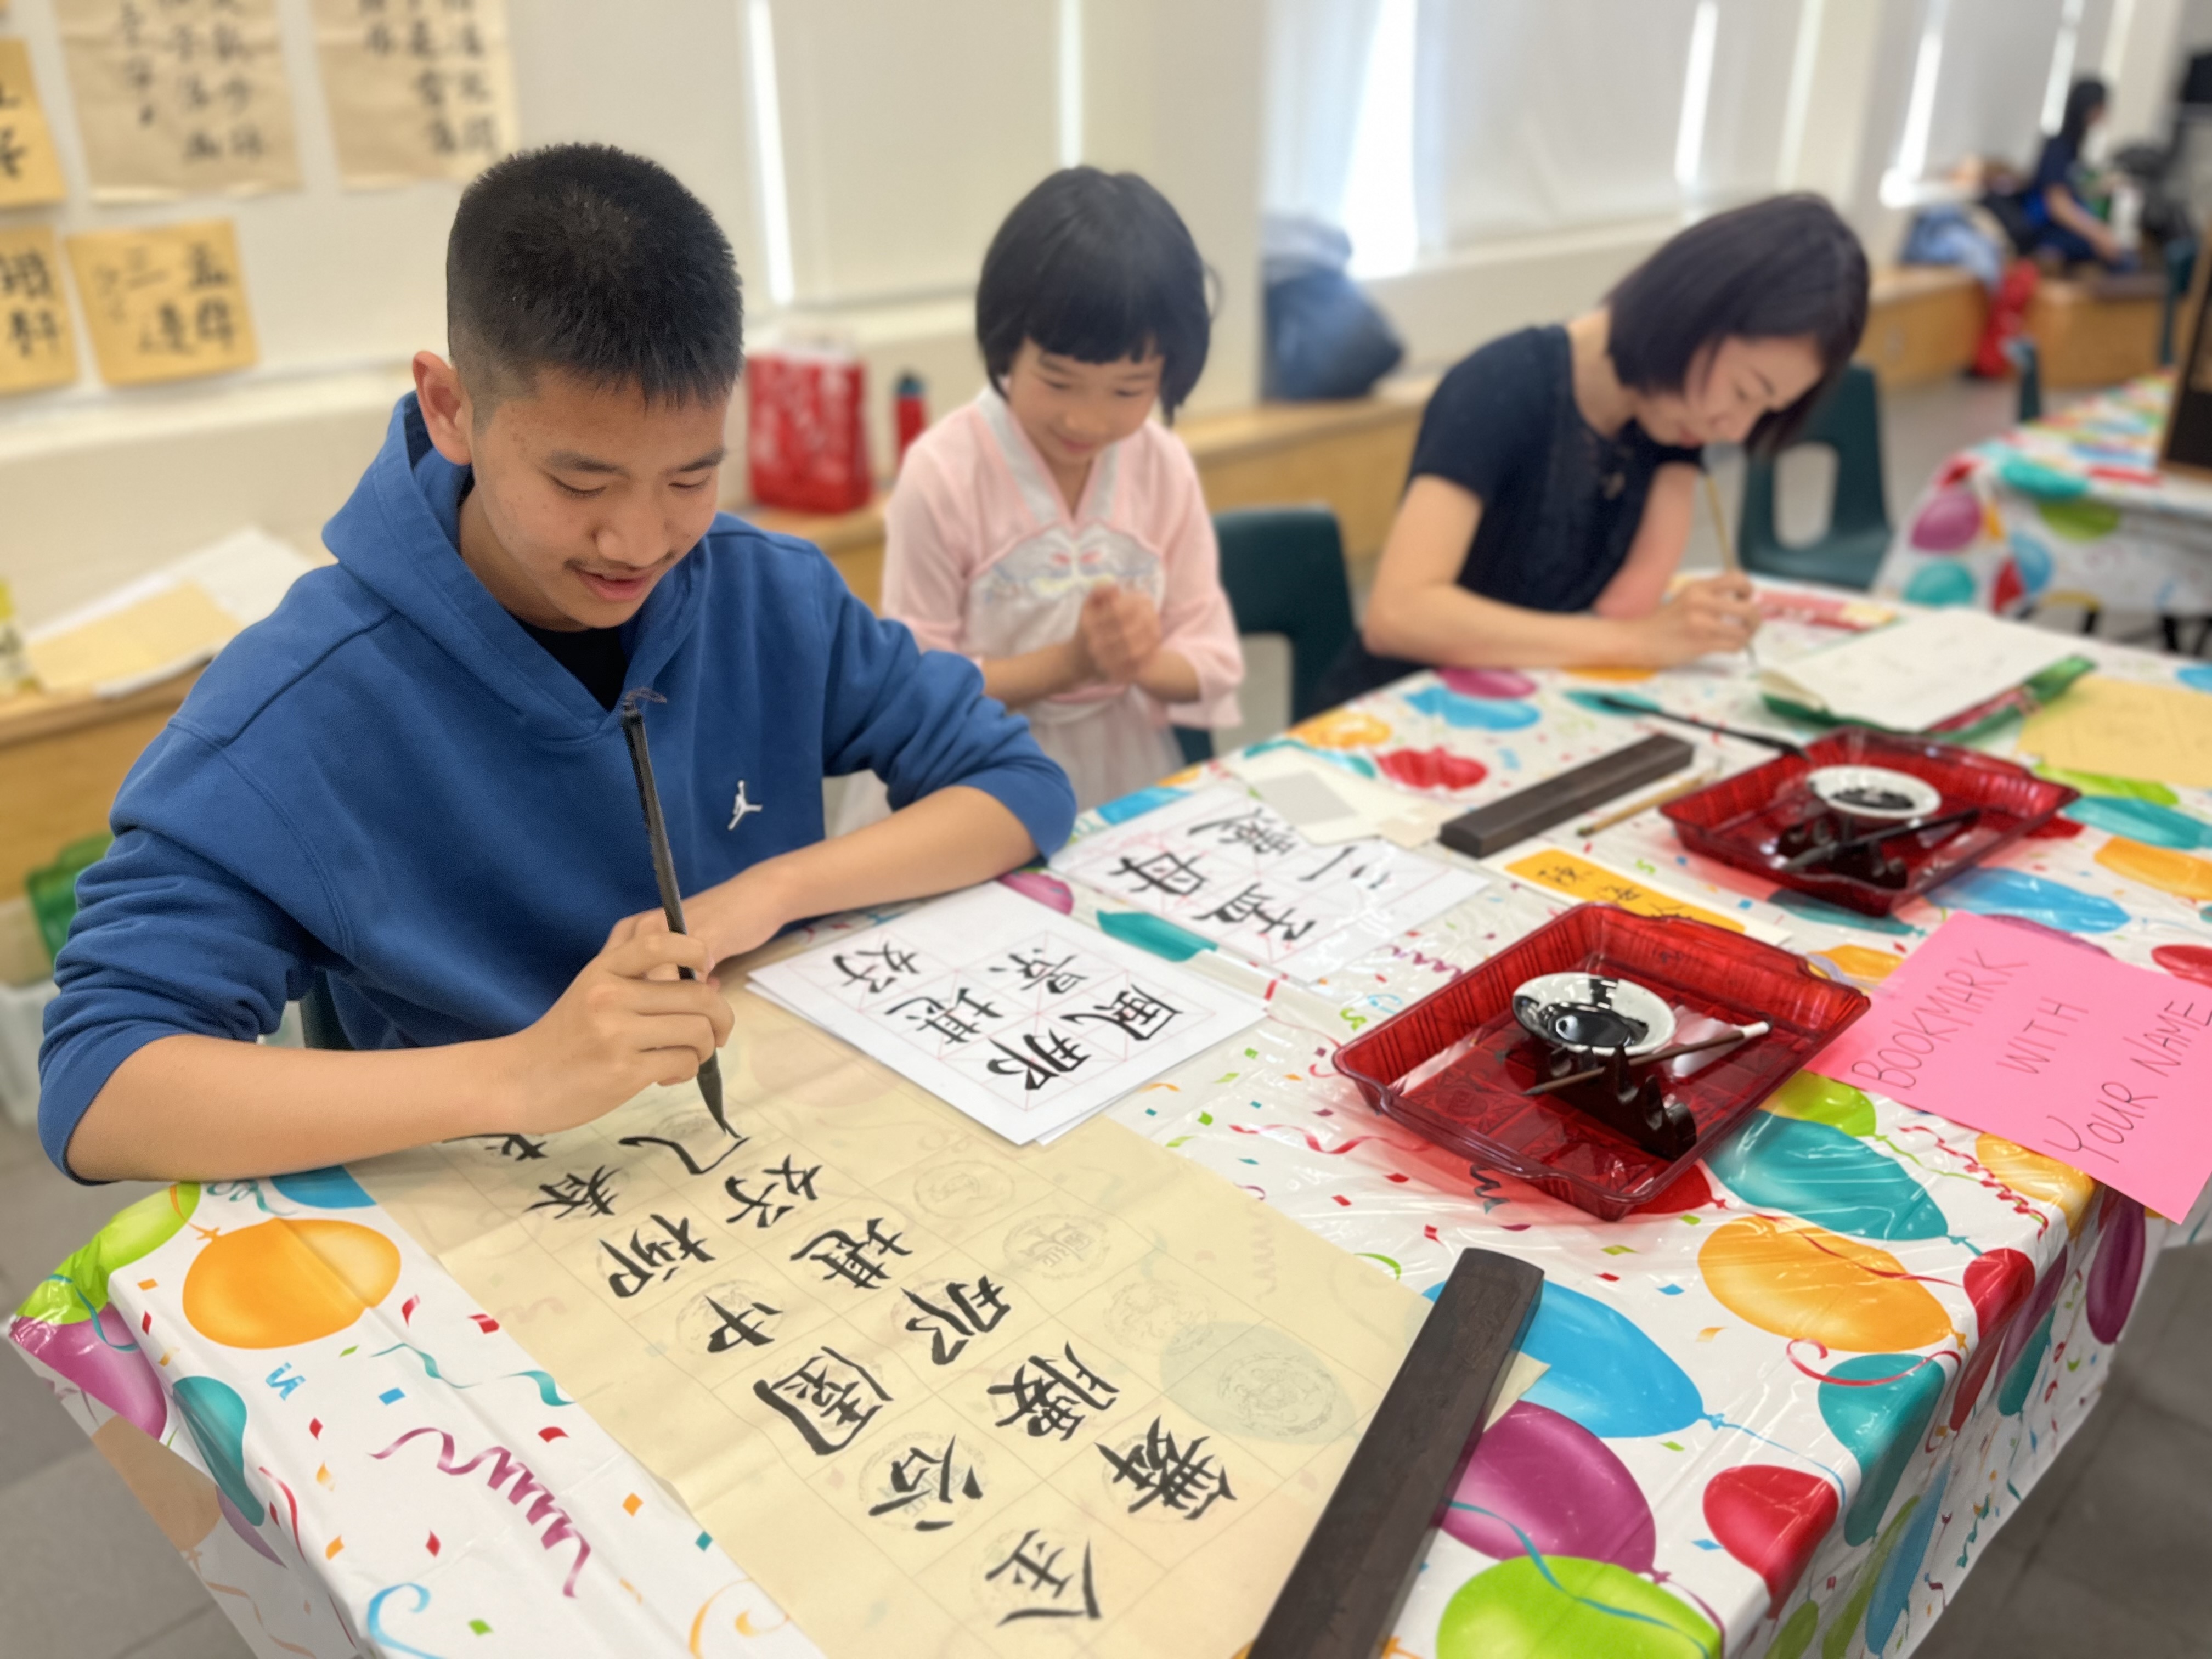 Three students seated at a table writing in calligraphy